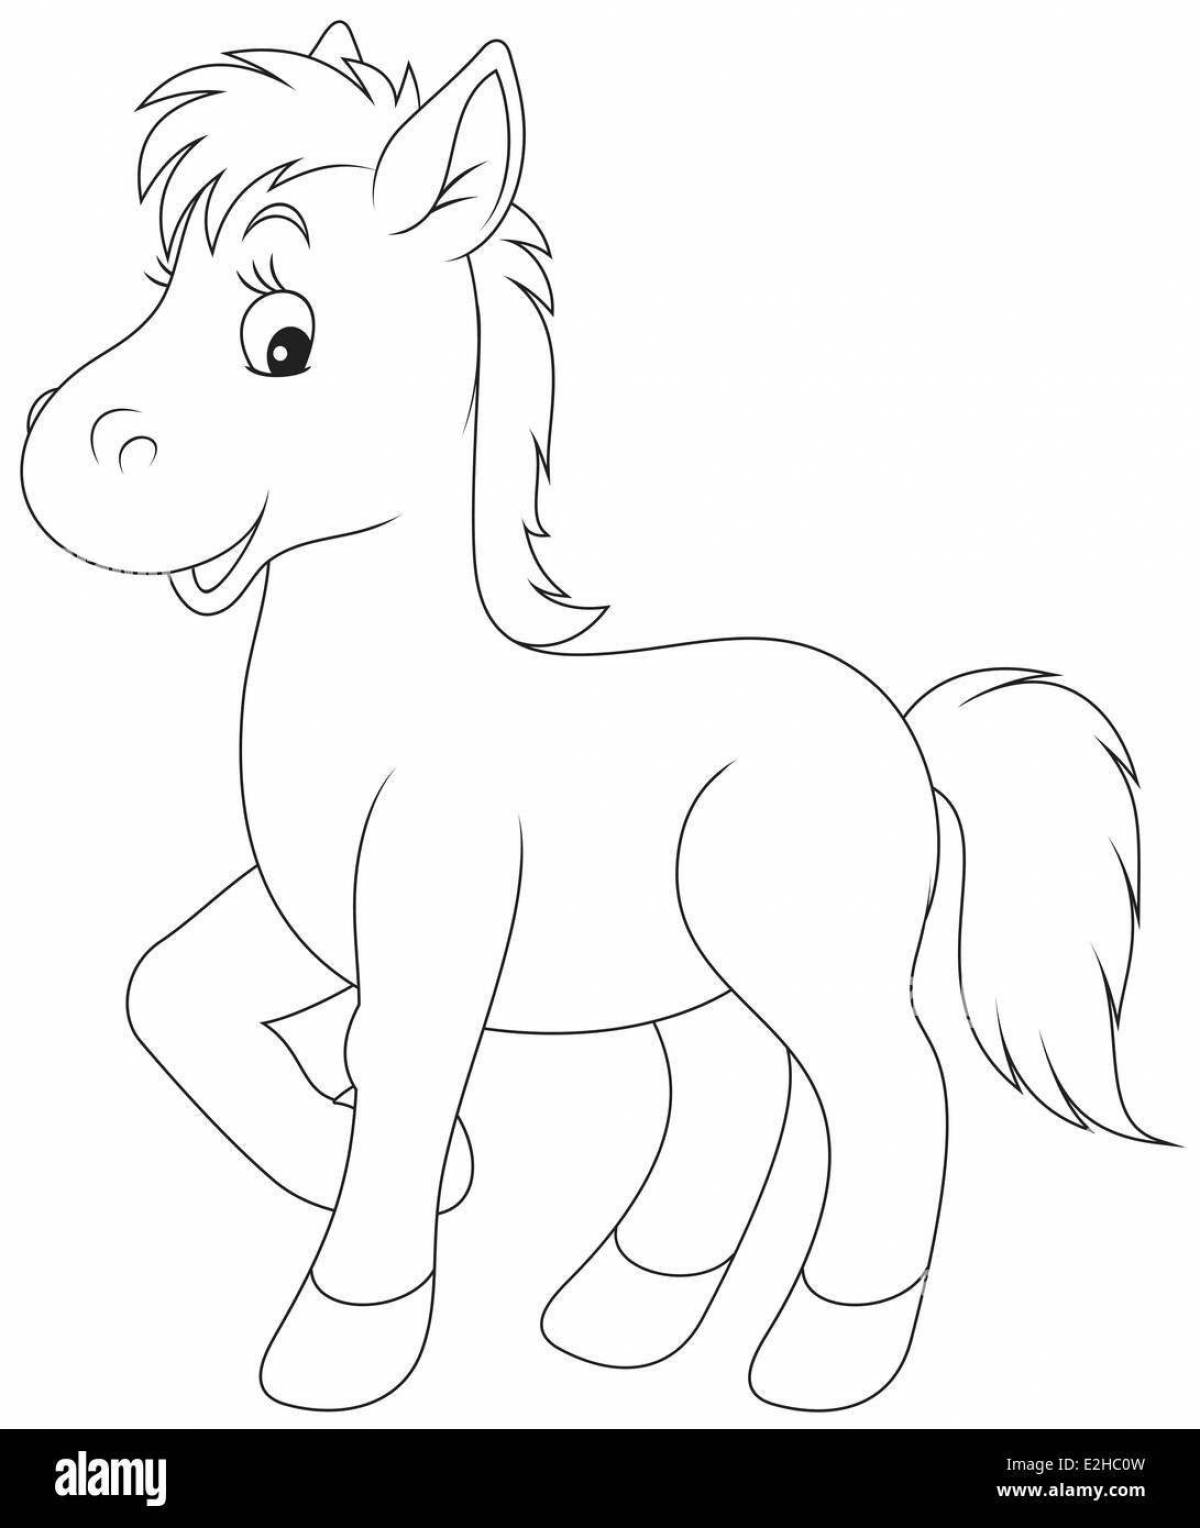 Colouring foal for kids